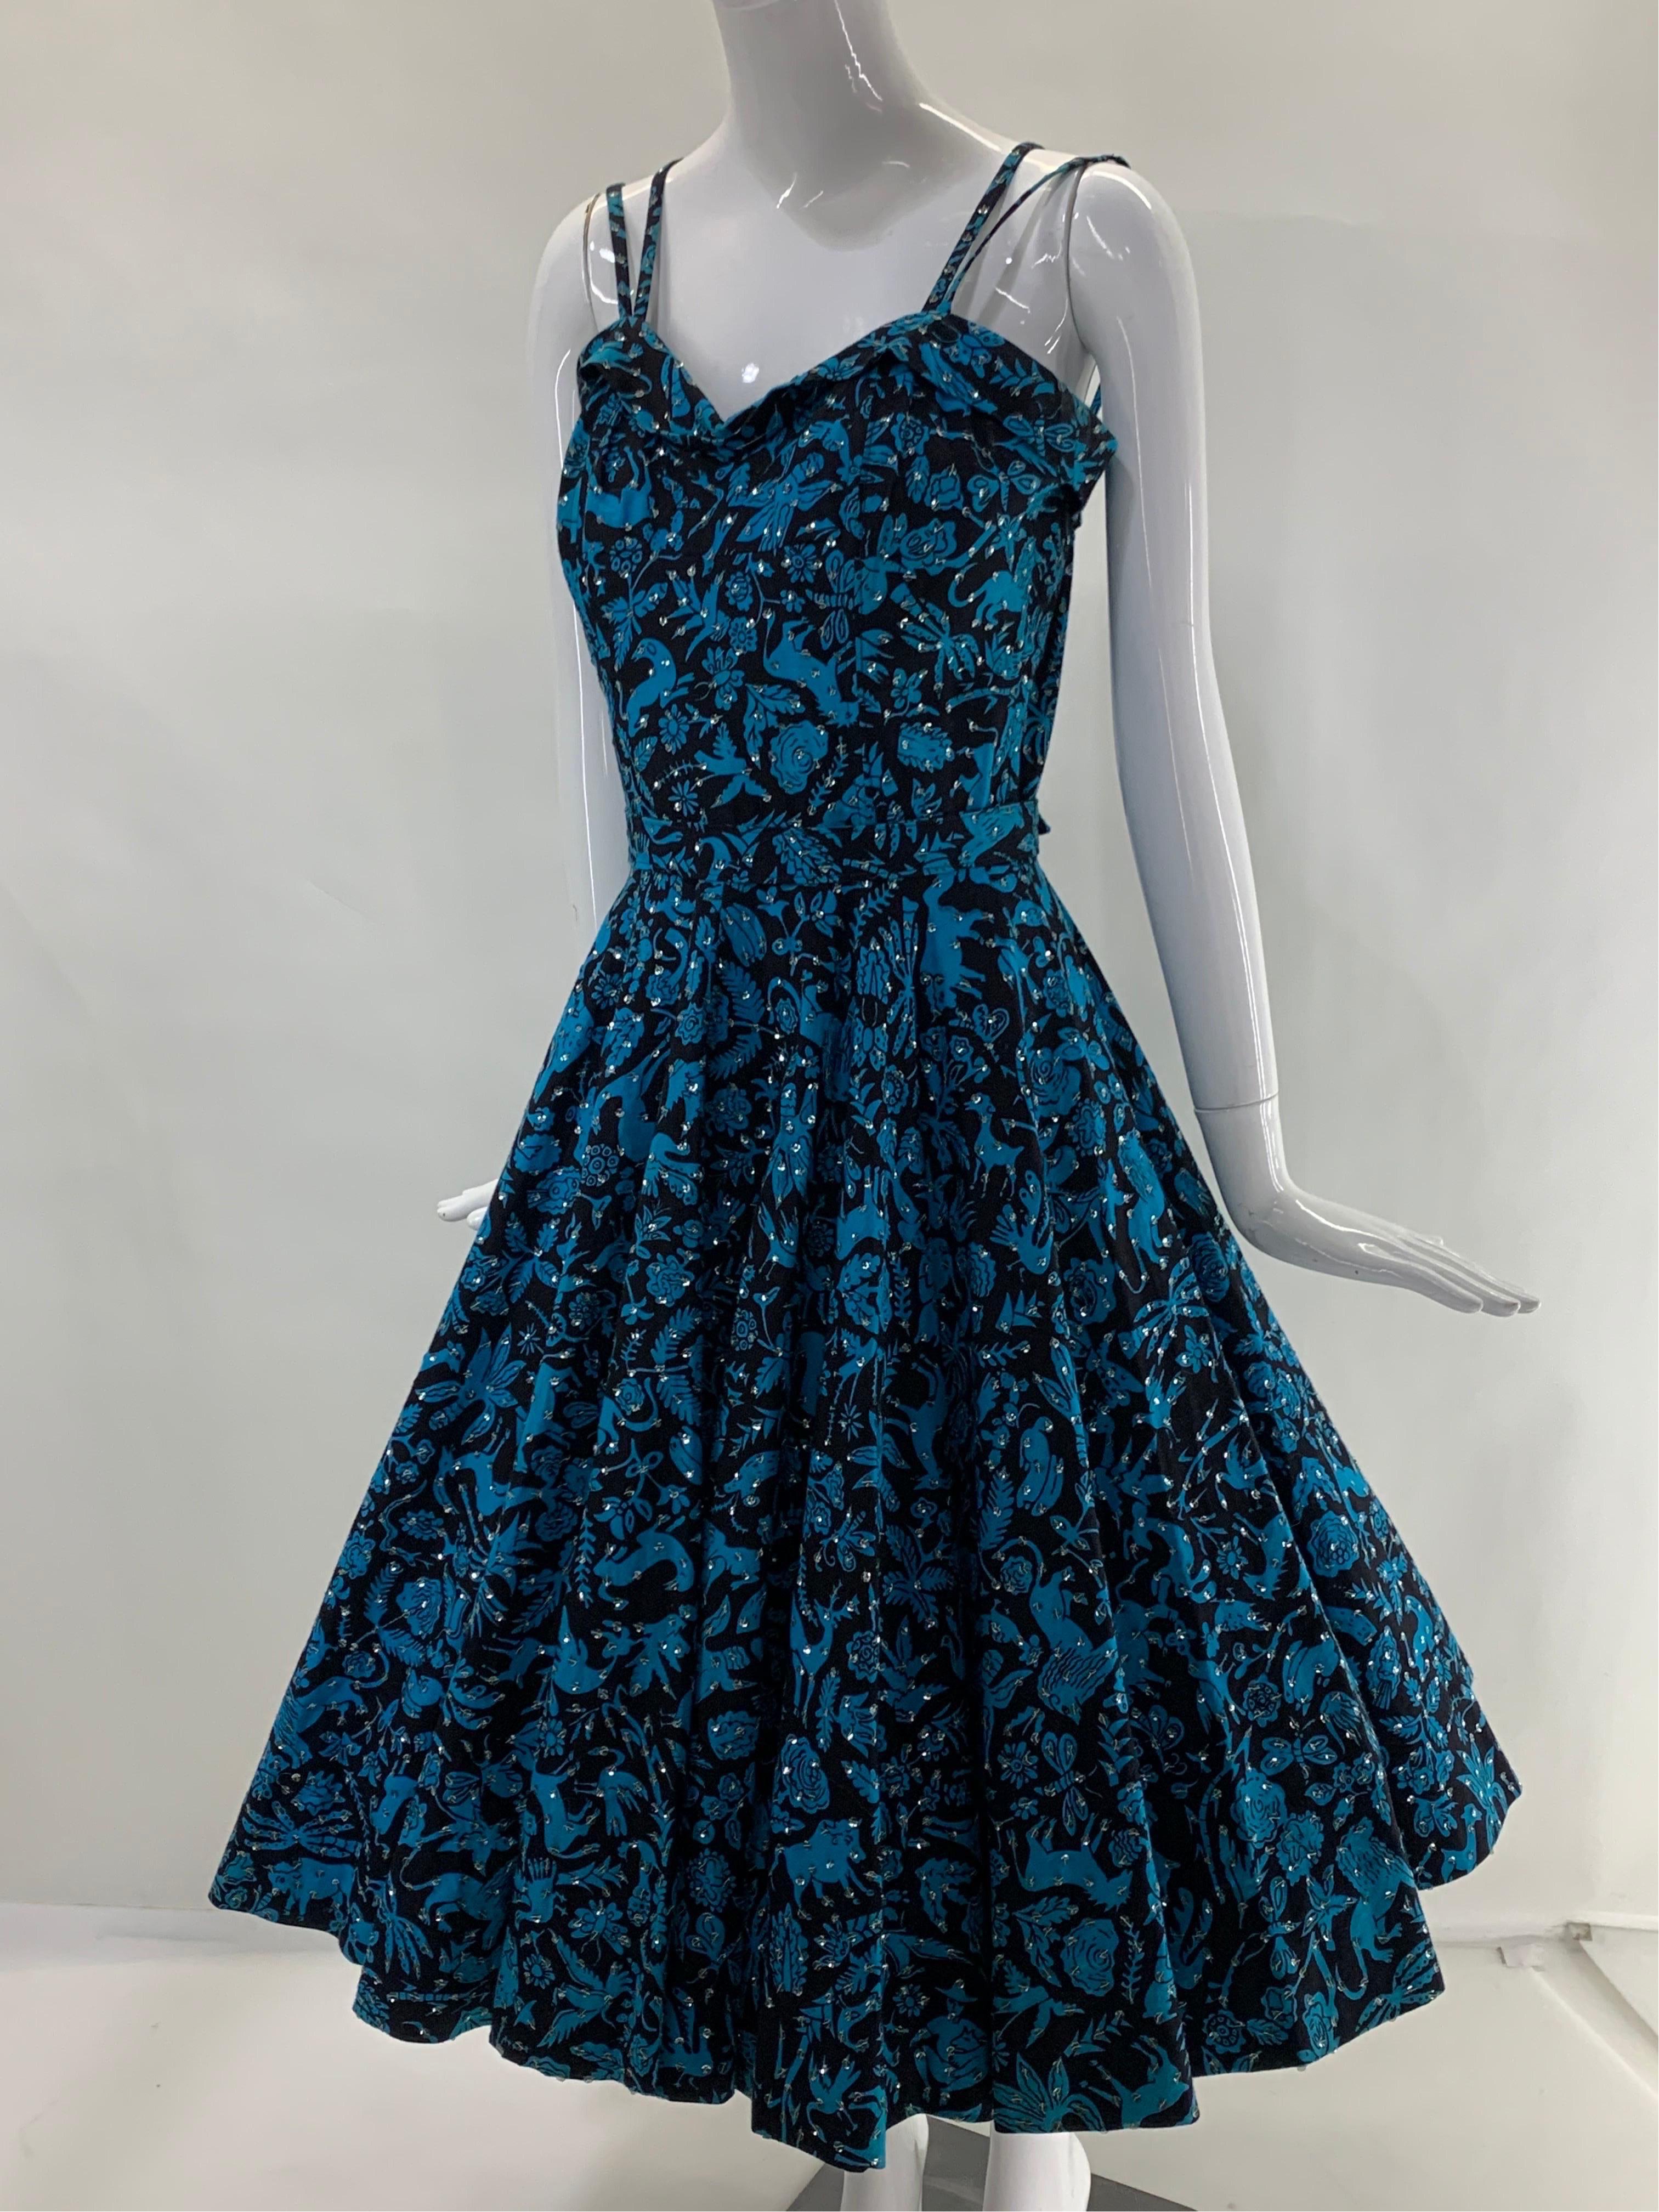 1950s Turquoise & Black Folkloric Print Cotton Summer Dress w/ Scattered Sequins For Sale 7